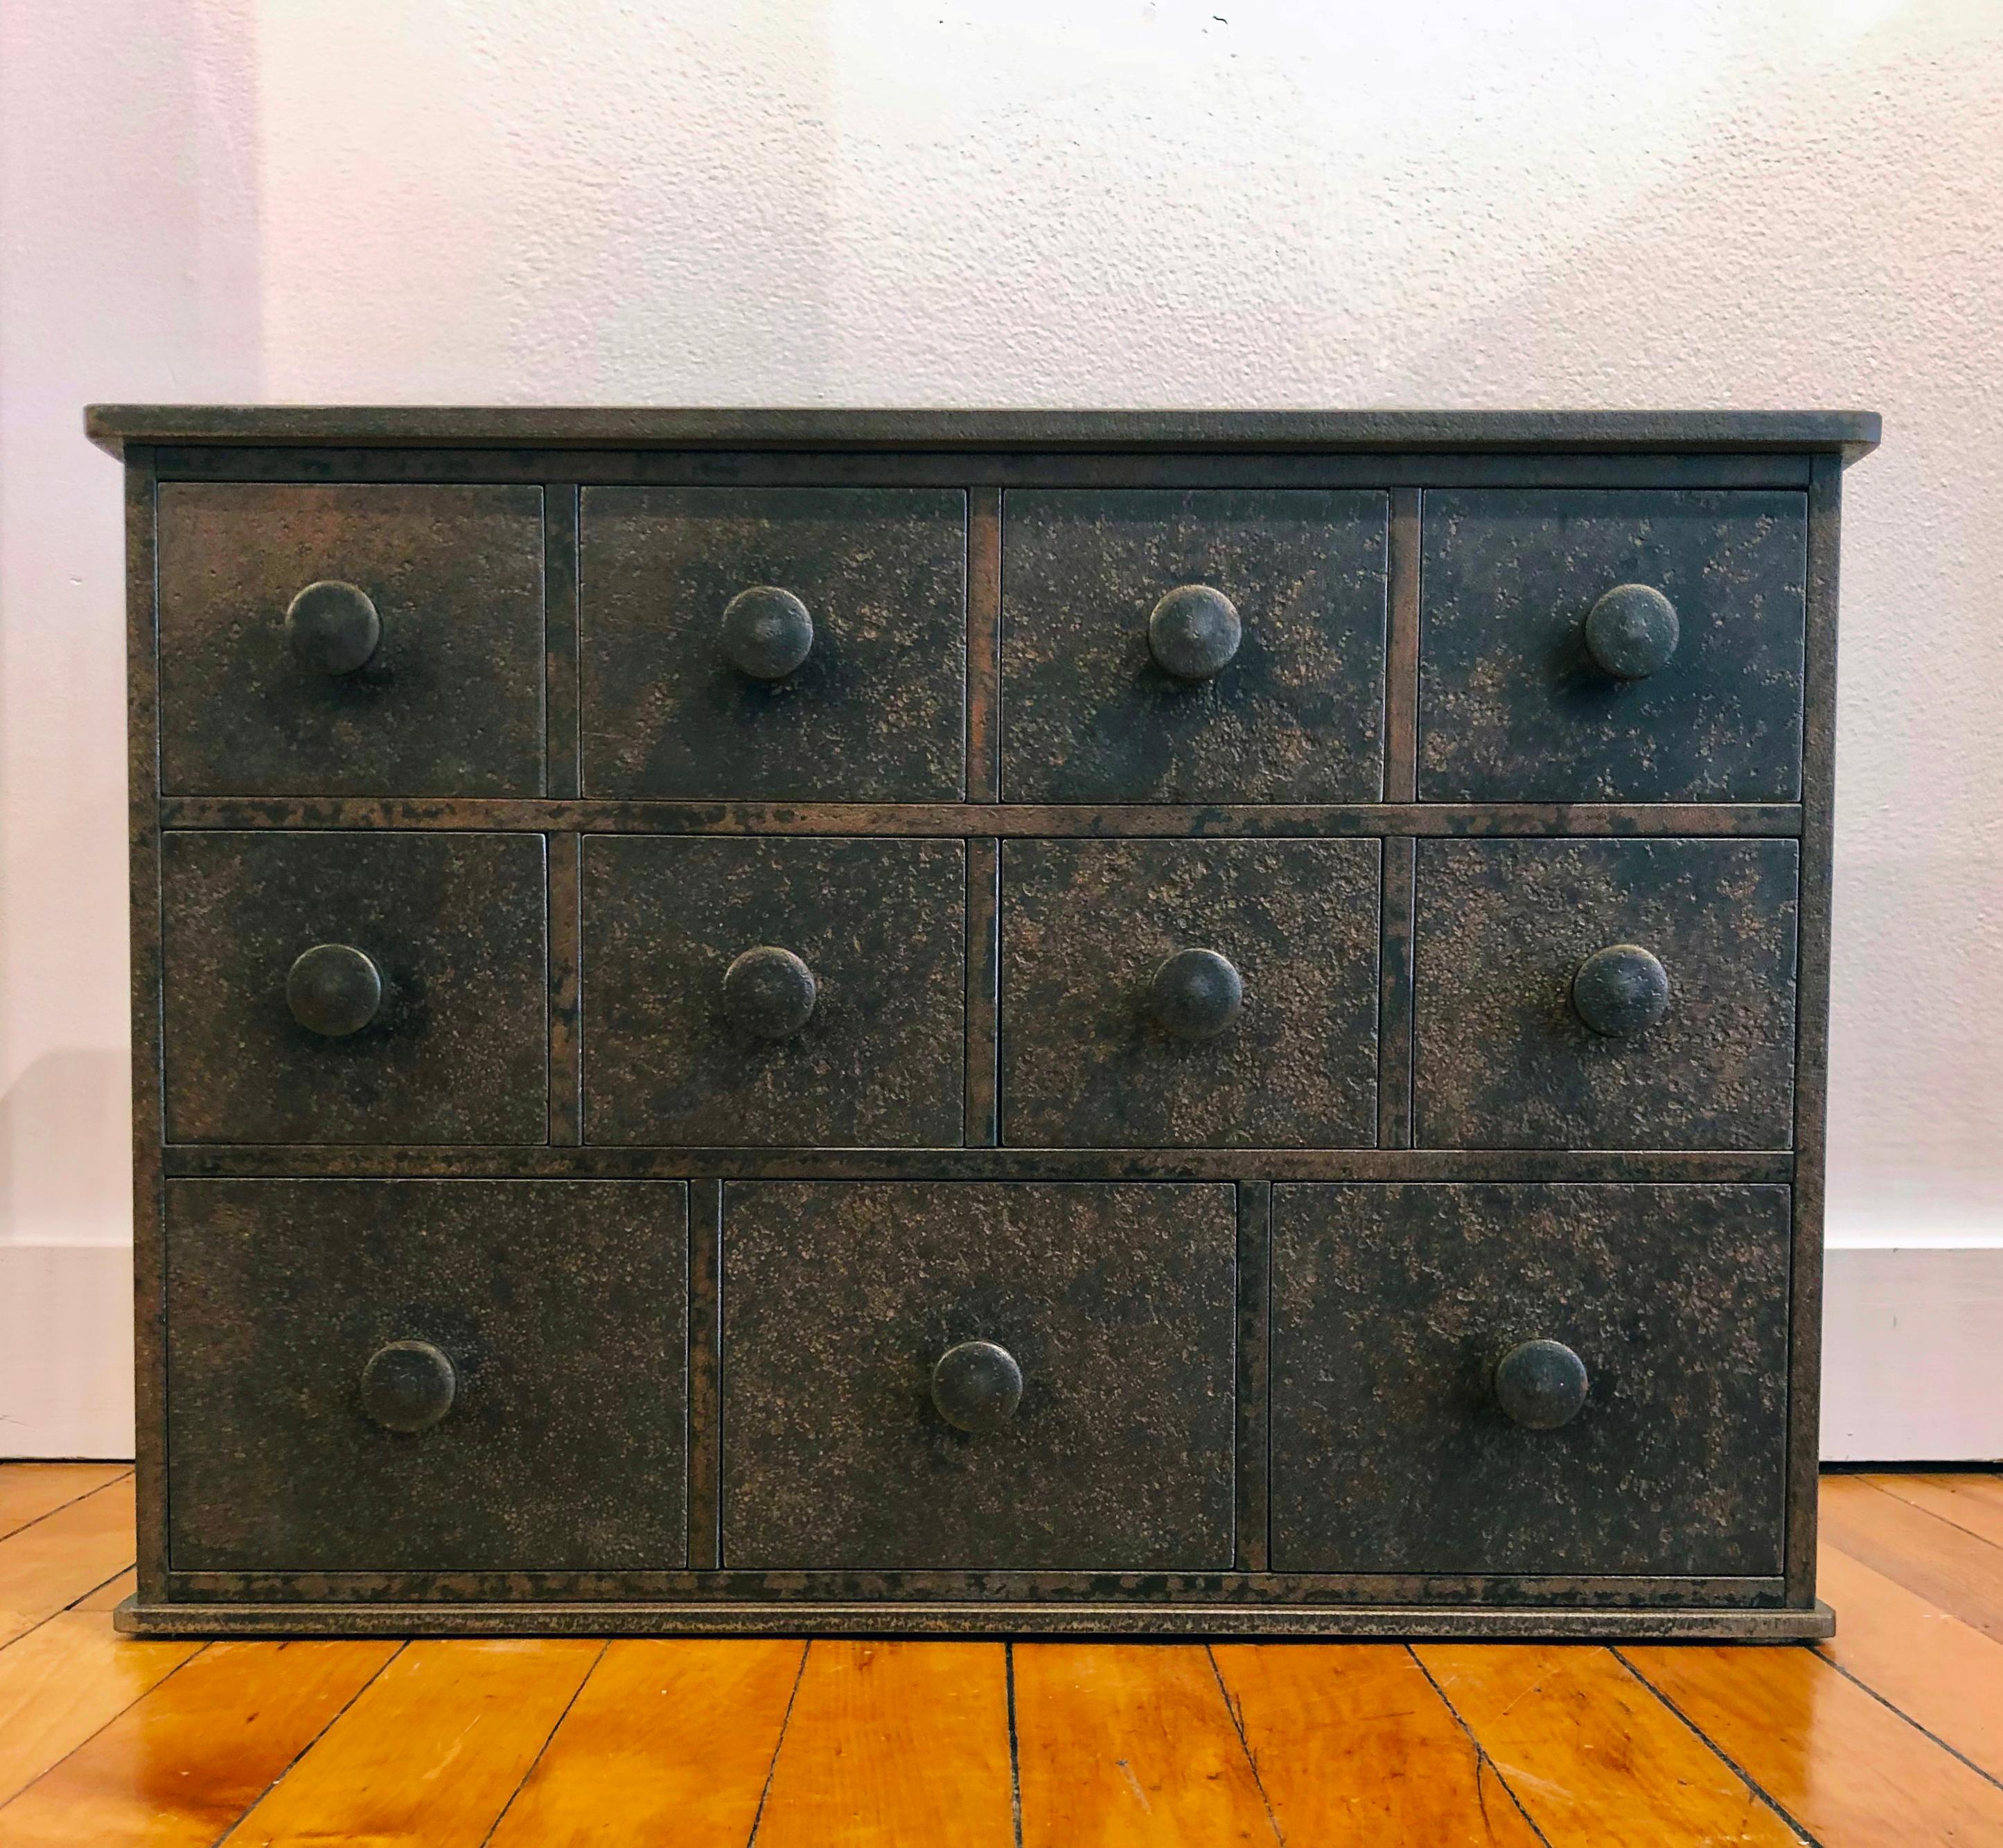 This eleven drawer cabinet is inspired by Shaker furniture. Fully functioning with three rows of drawers of varying sizes and handmade hardware, this steel cabinet is by renowned furniture maker Jim Rose. With its timeless simplicity, this Shaker